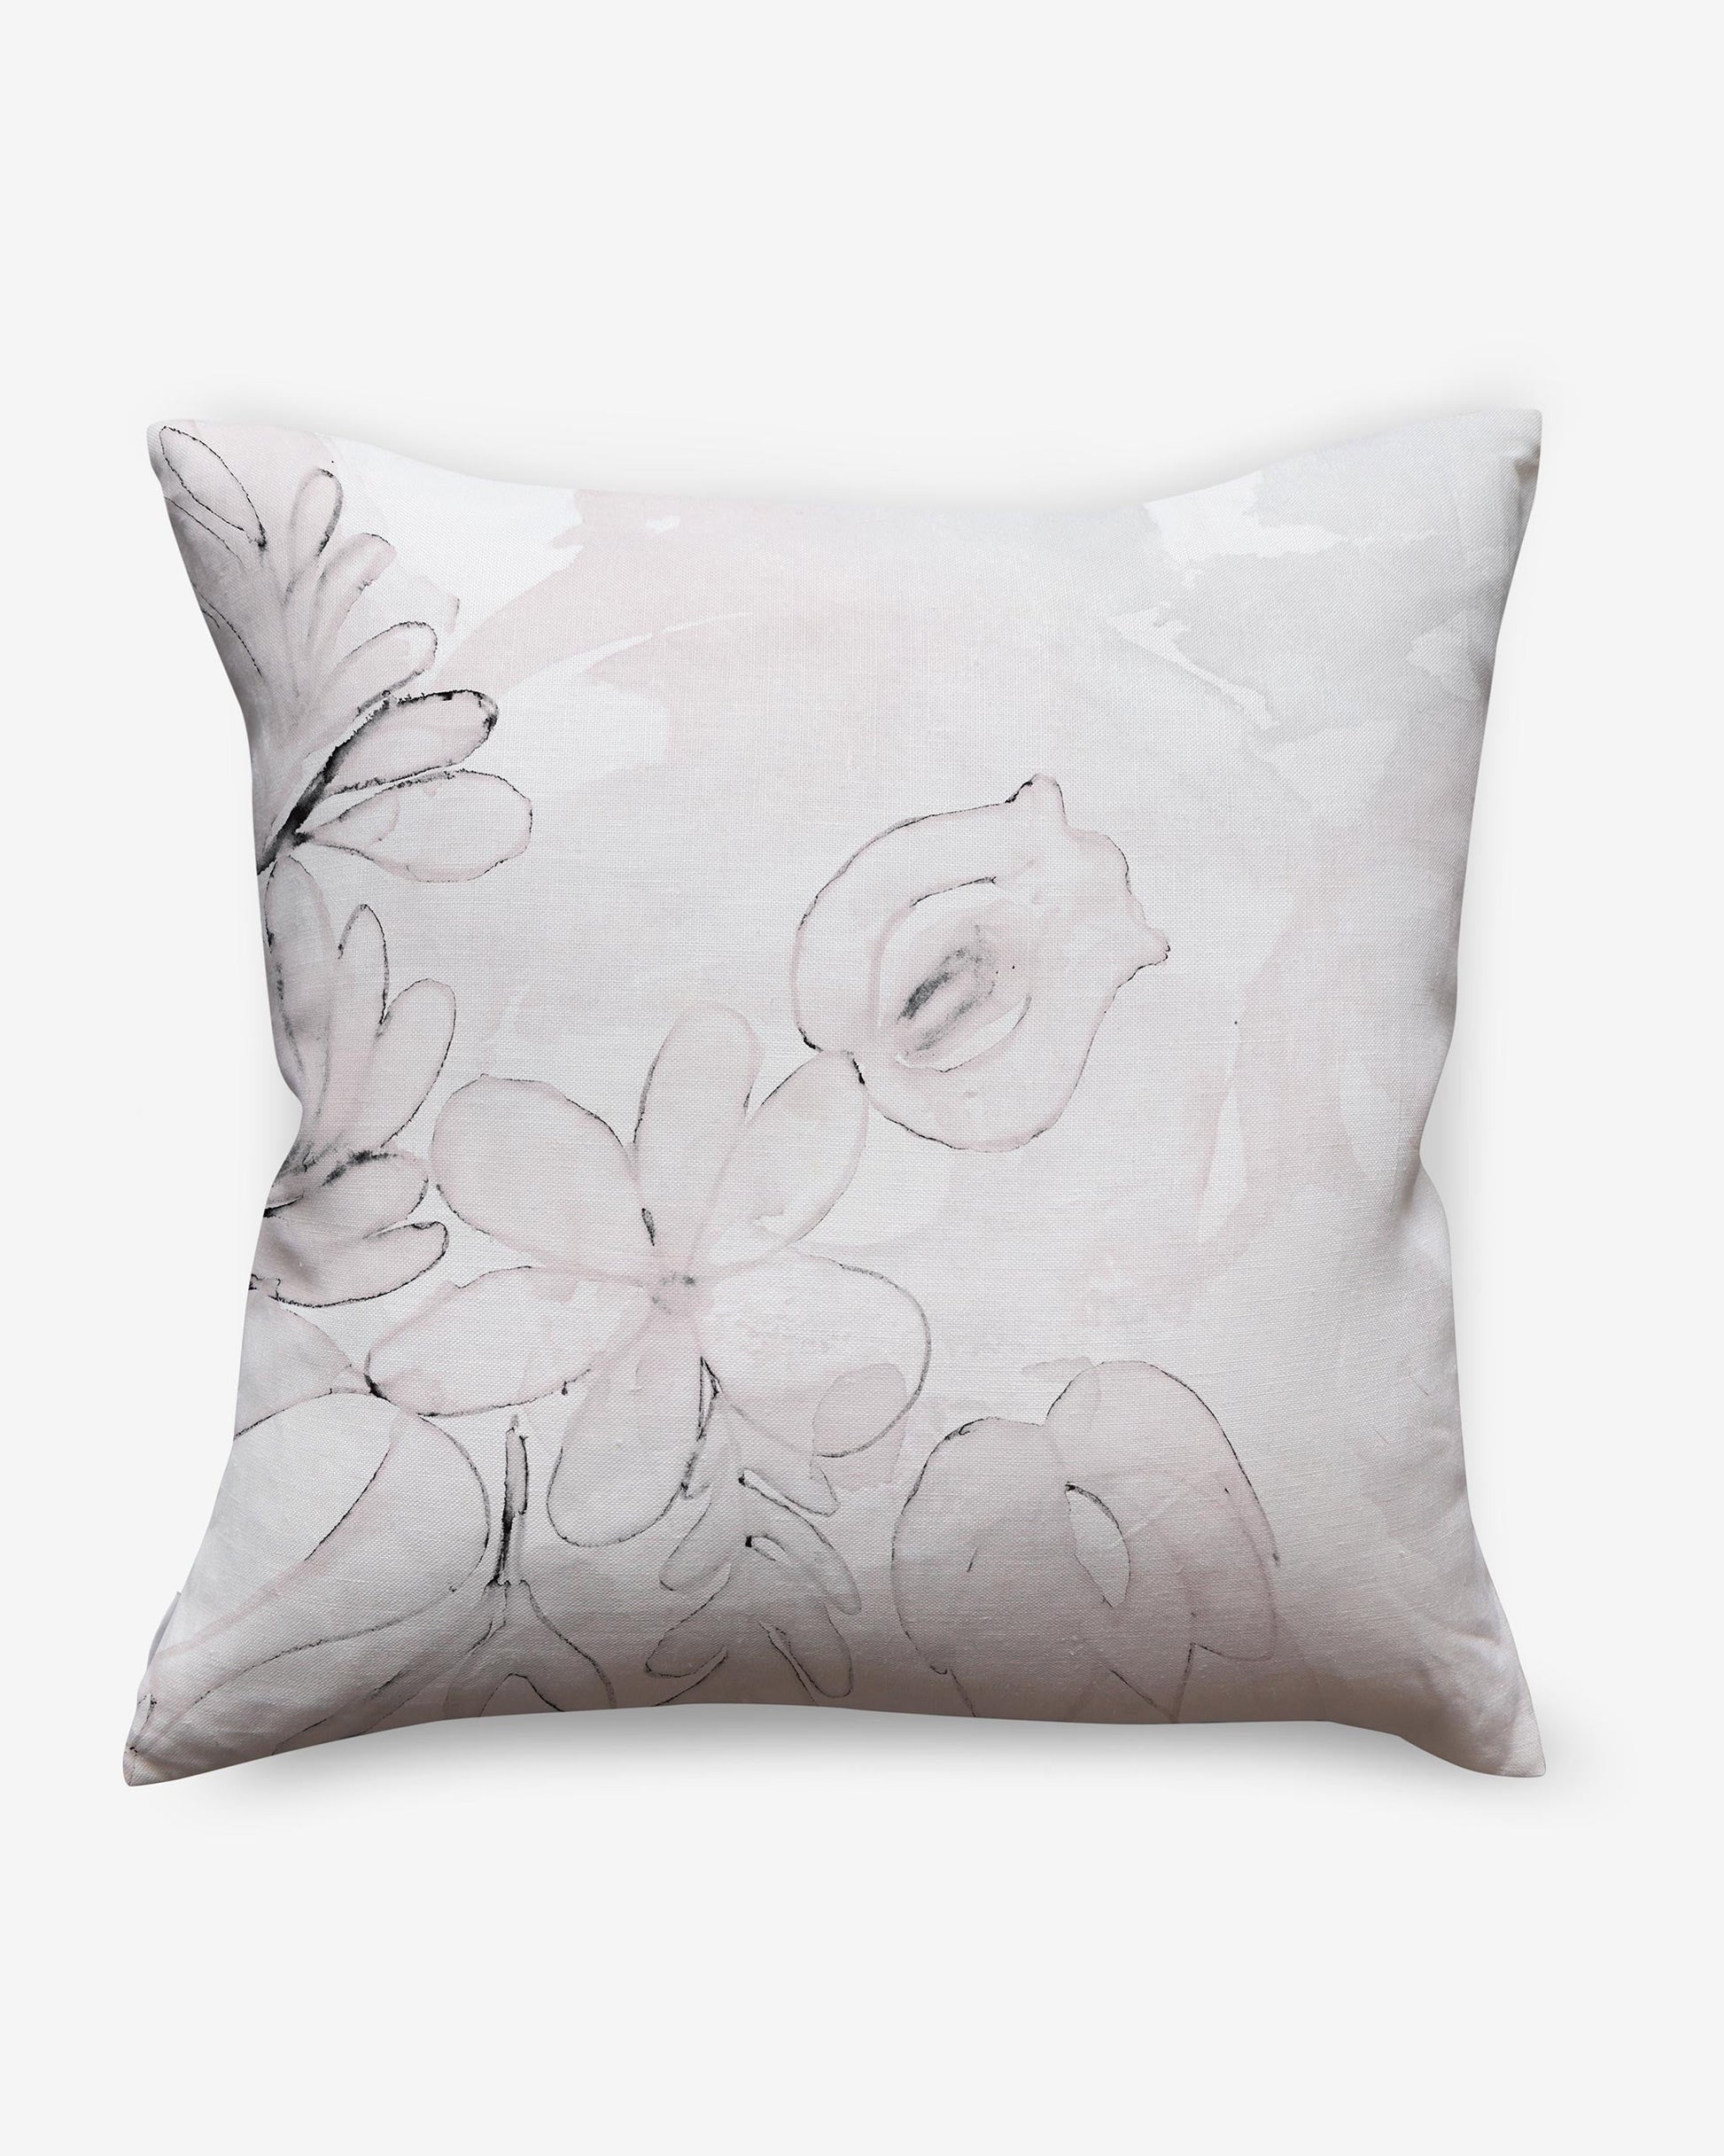 A Belize Blooms Pillow with a tropical abundance floral design on luxury fabric